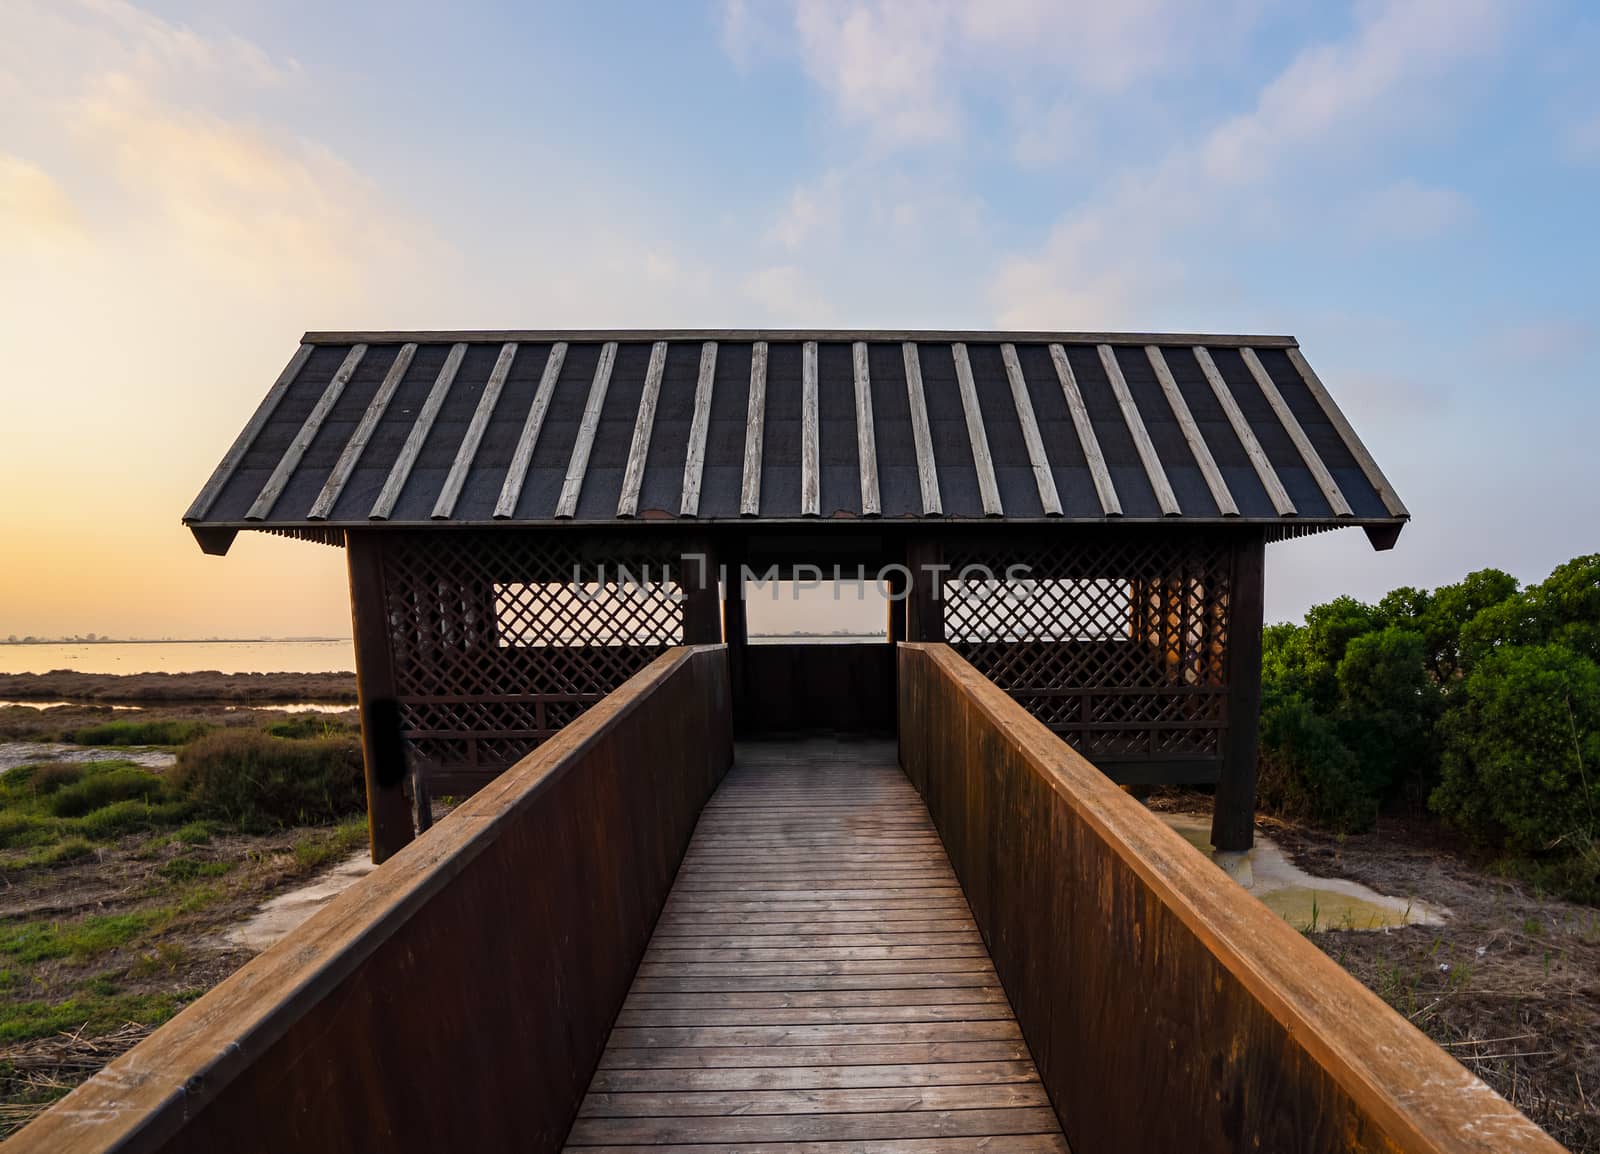 Wooden cabin for bird watching in the Ebro river delta, Spain by tanaonte